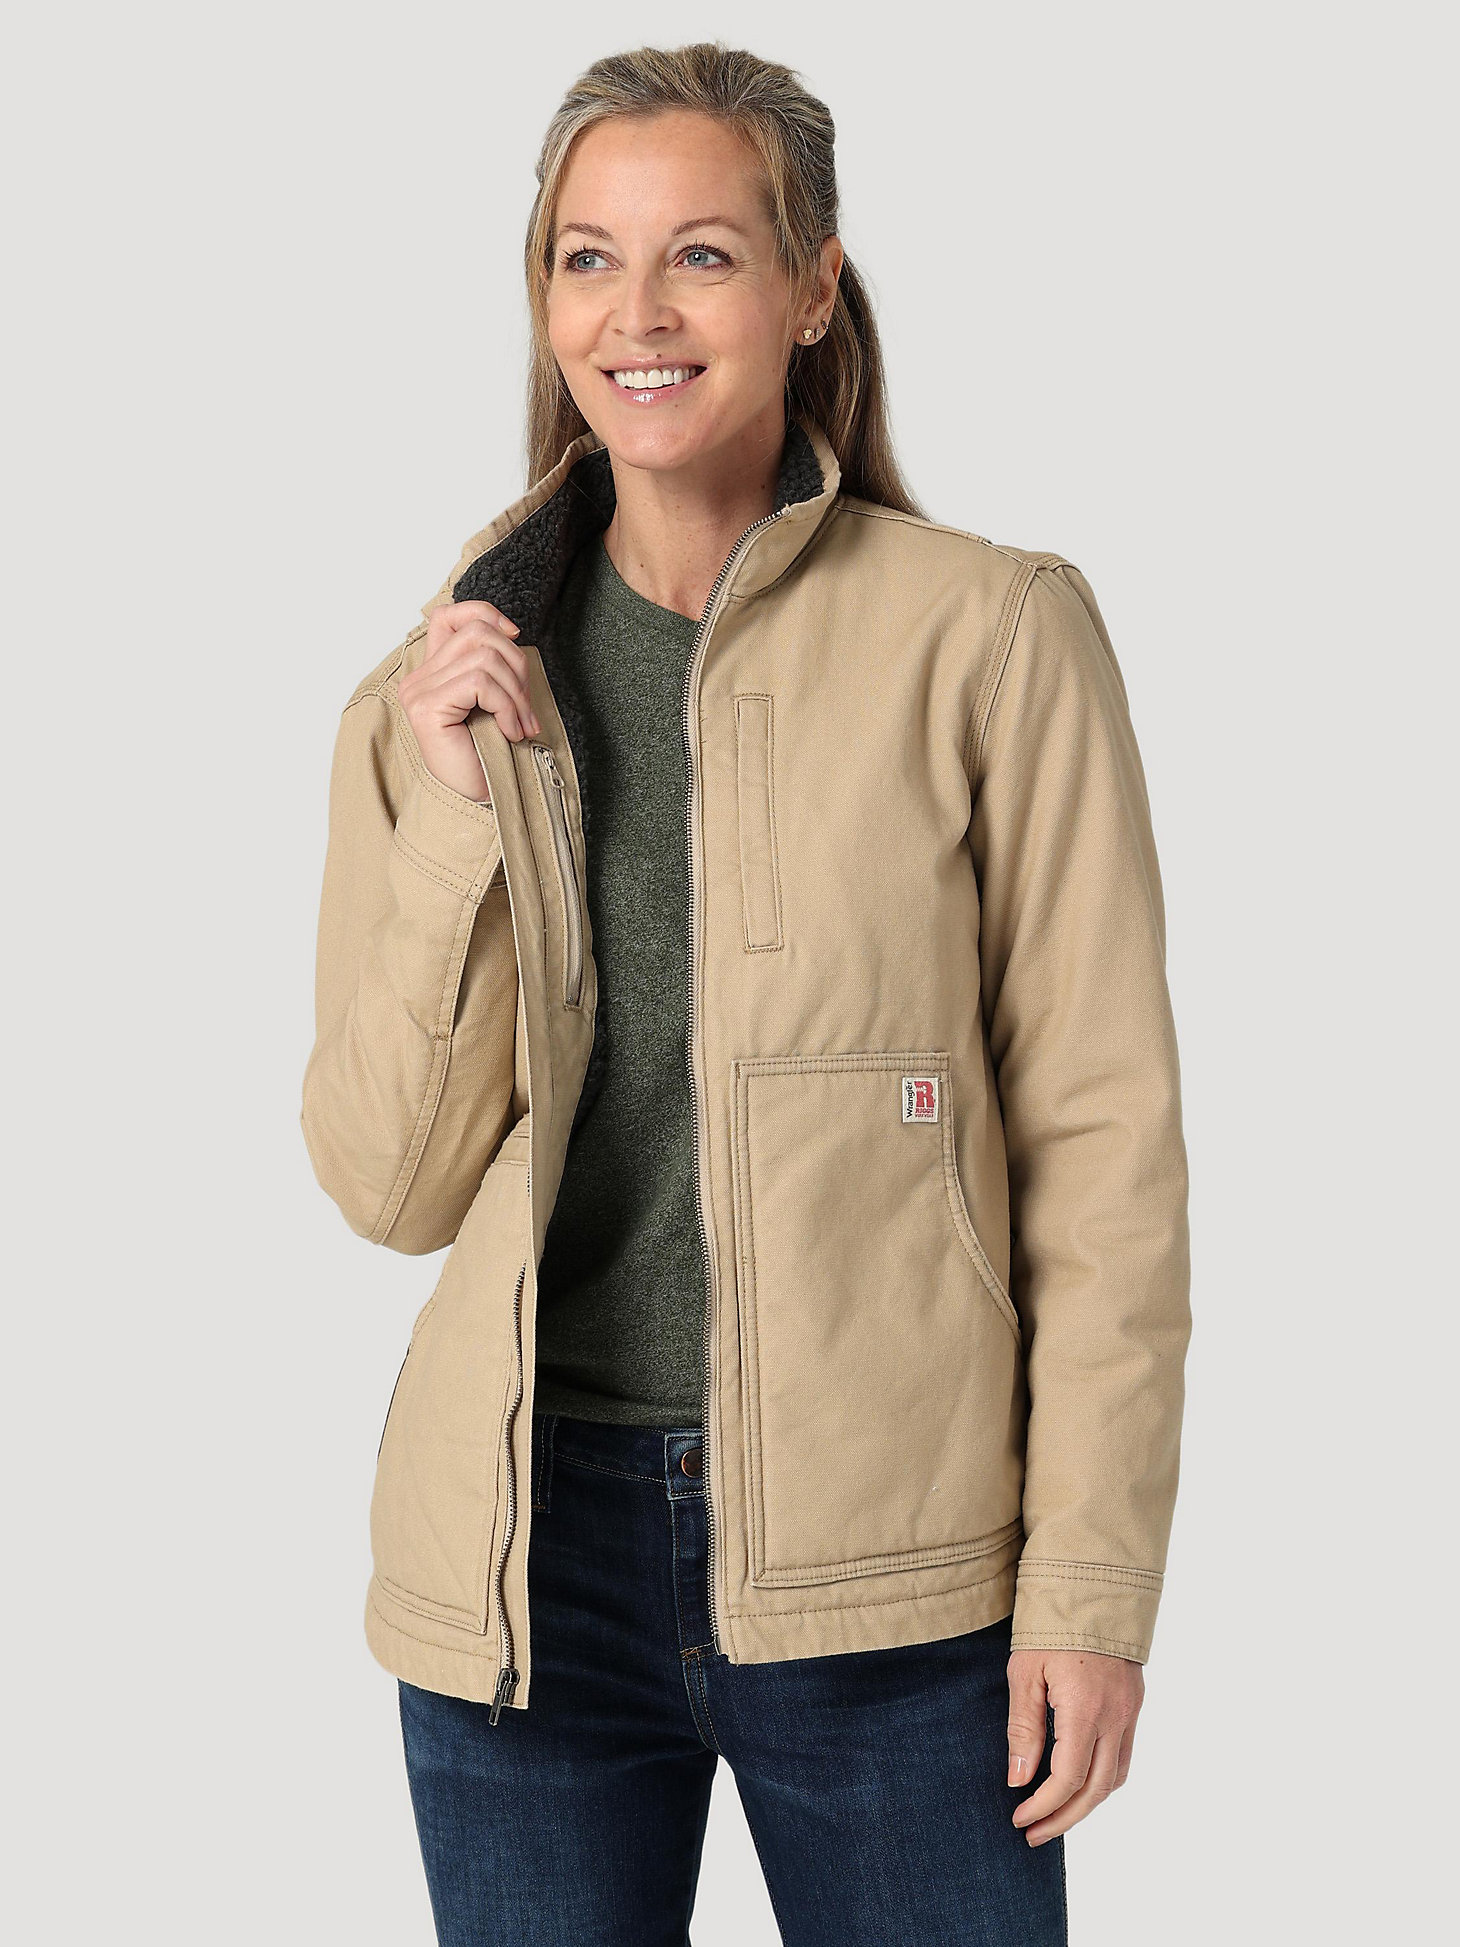 Womens RIGGS Tough Layers Sherpa Lined Canvas Jacket in Golden Khaki alternative view 1